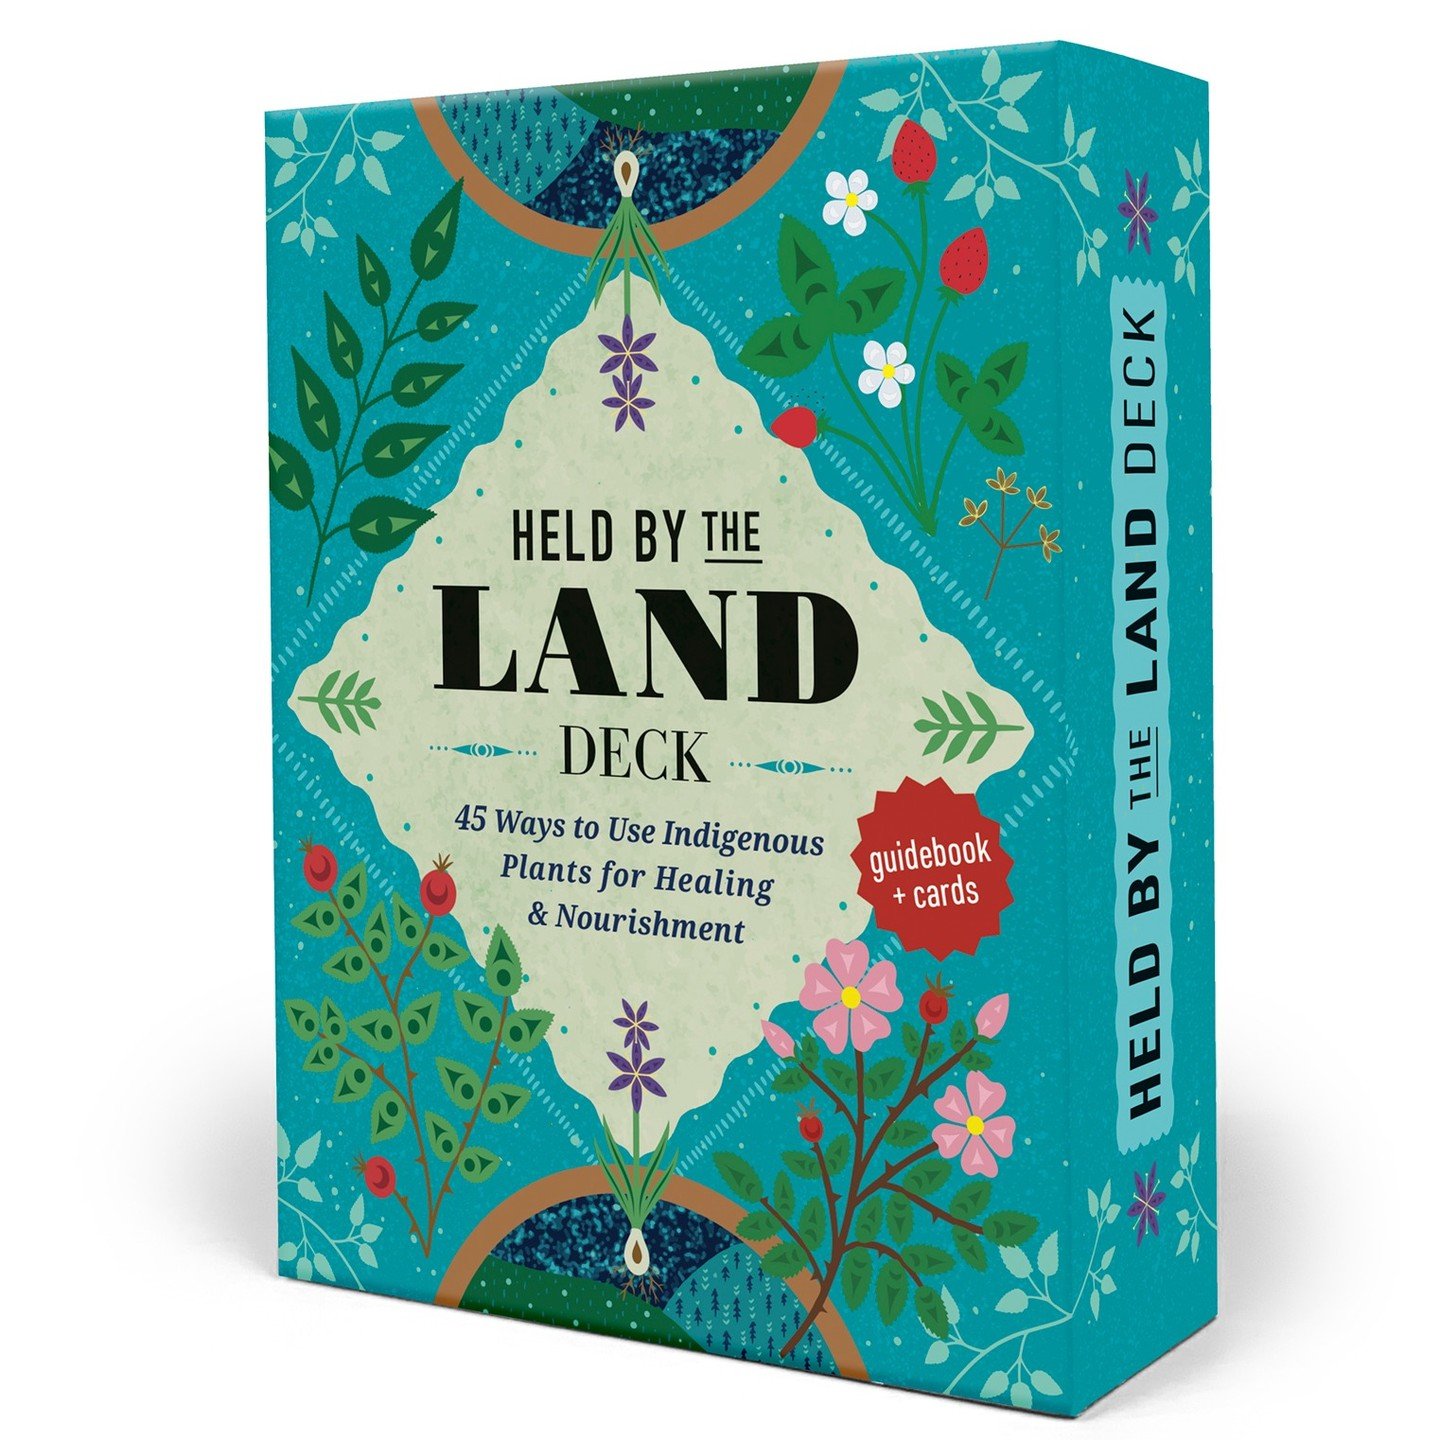 Have Indigenous plant knowledge at your fingertips with this gorgeously illustrated card deck from Leigh Joseph, an ethnobotanist and a member of the Squamish Nation.

This elegant, full-color card deck and booklet is your go-to guide for Indigenous 